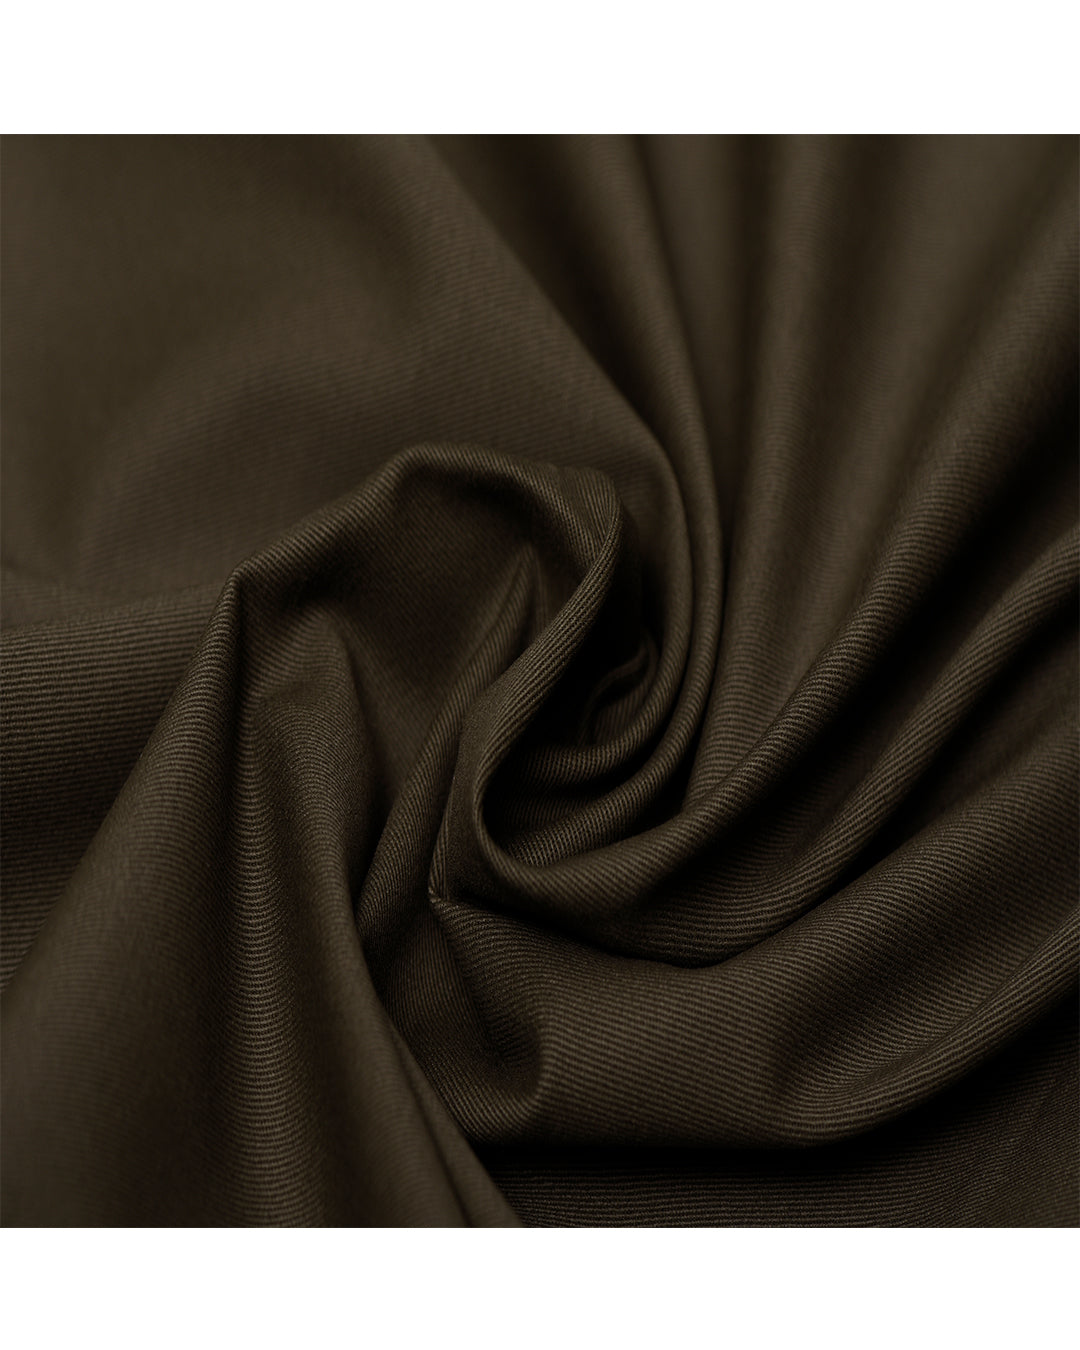 Close up view of custom Genoa Chino pants for men by Luxire in brown